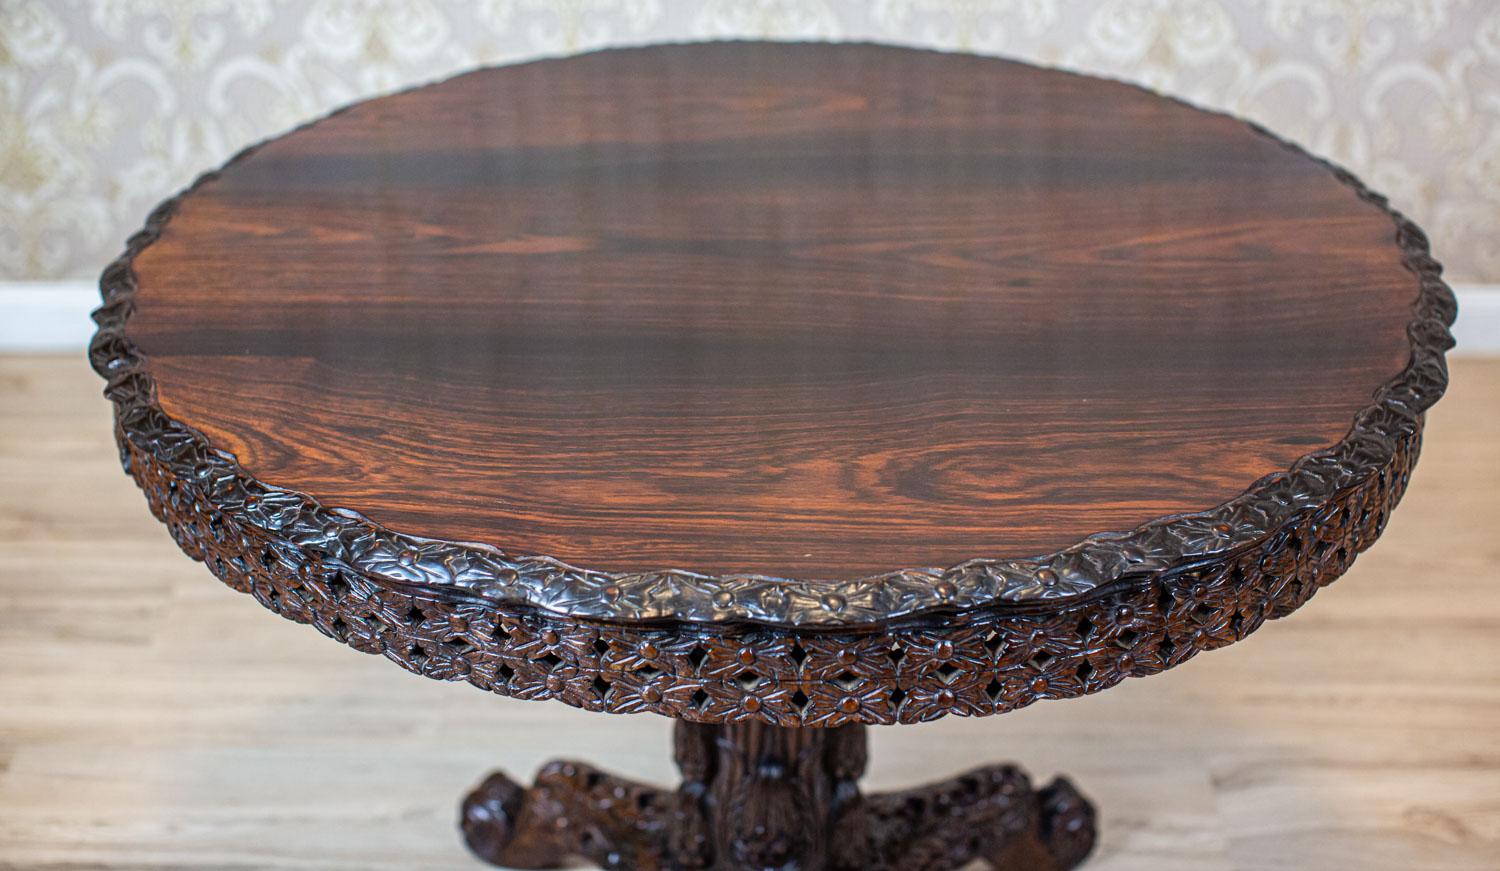 European Decorative Rosewood Table from the Turn of the 19th and 20th Centuries For Sale